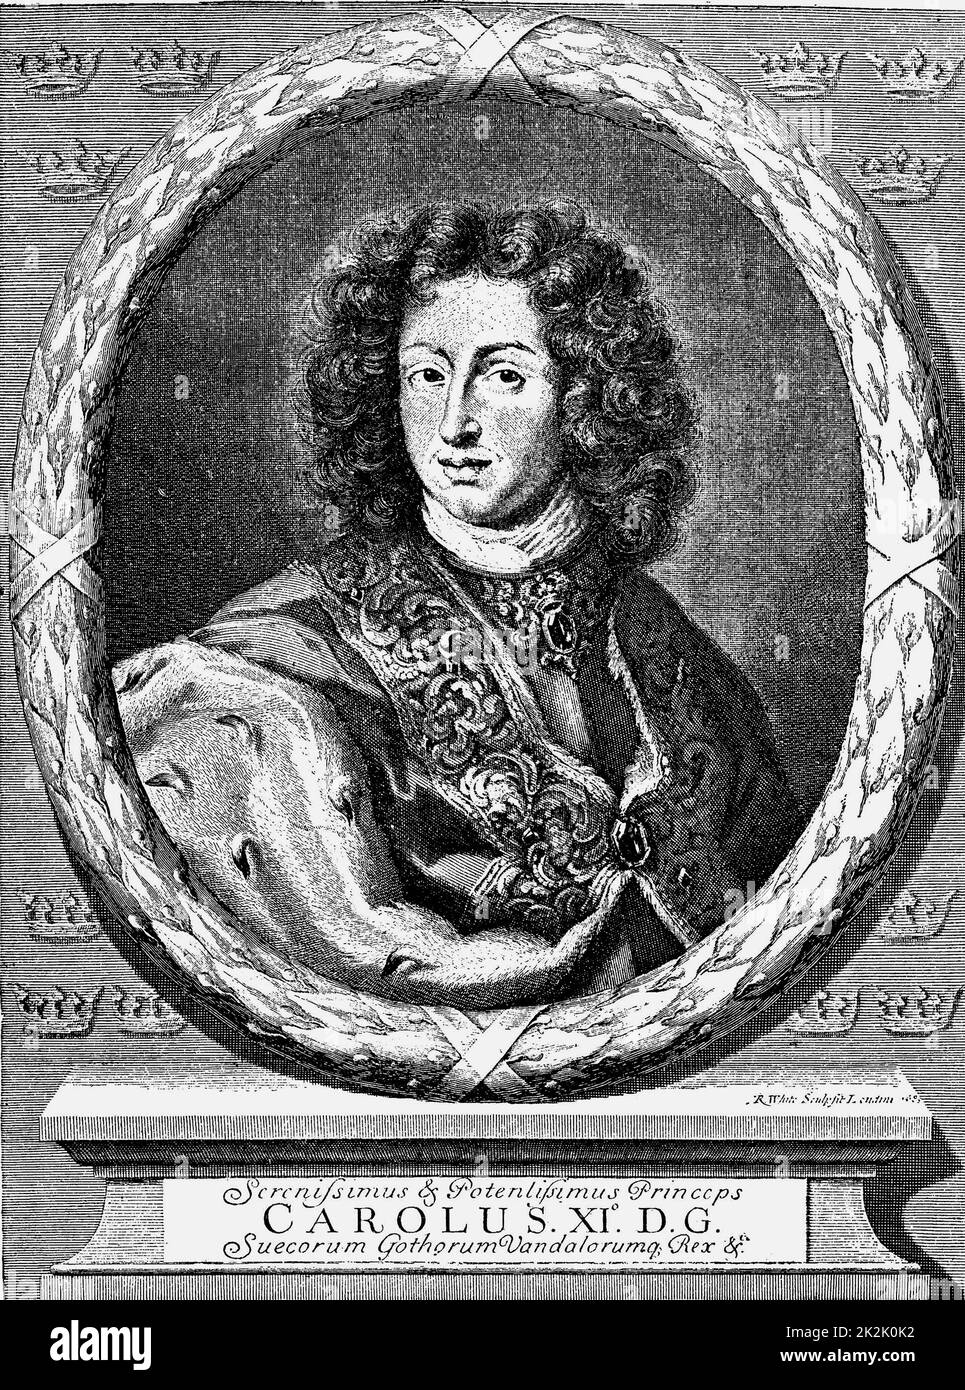 Charles XI (1655-1697) King of Sweden from 1660 to 1697 during the period of the Swedish empire (1611–1718). Stock Photo